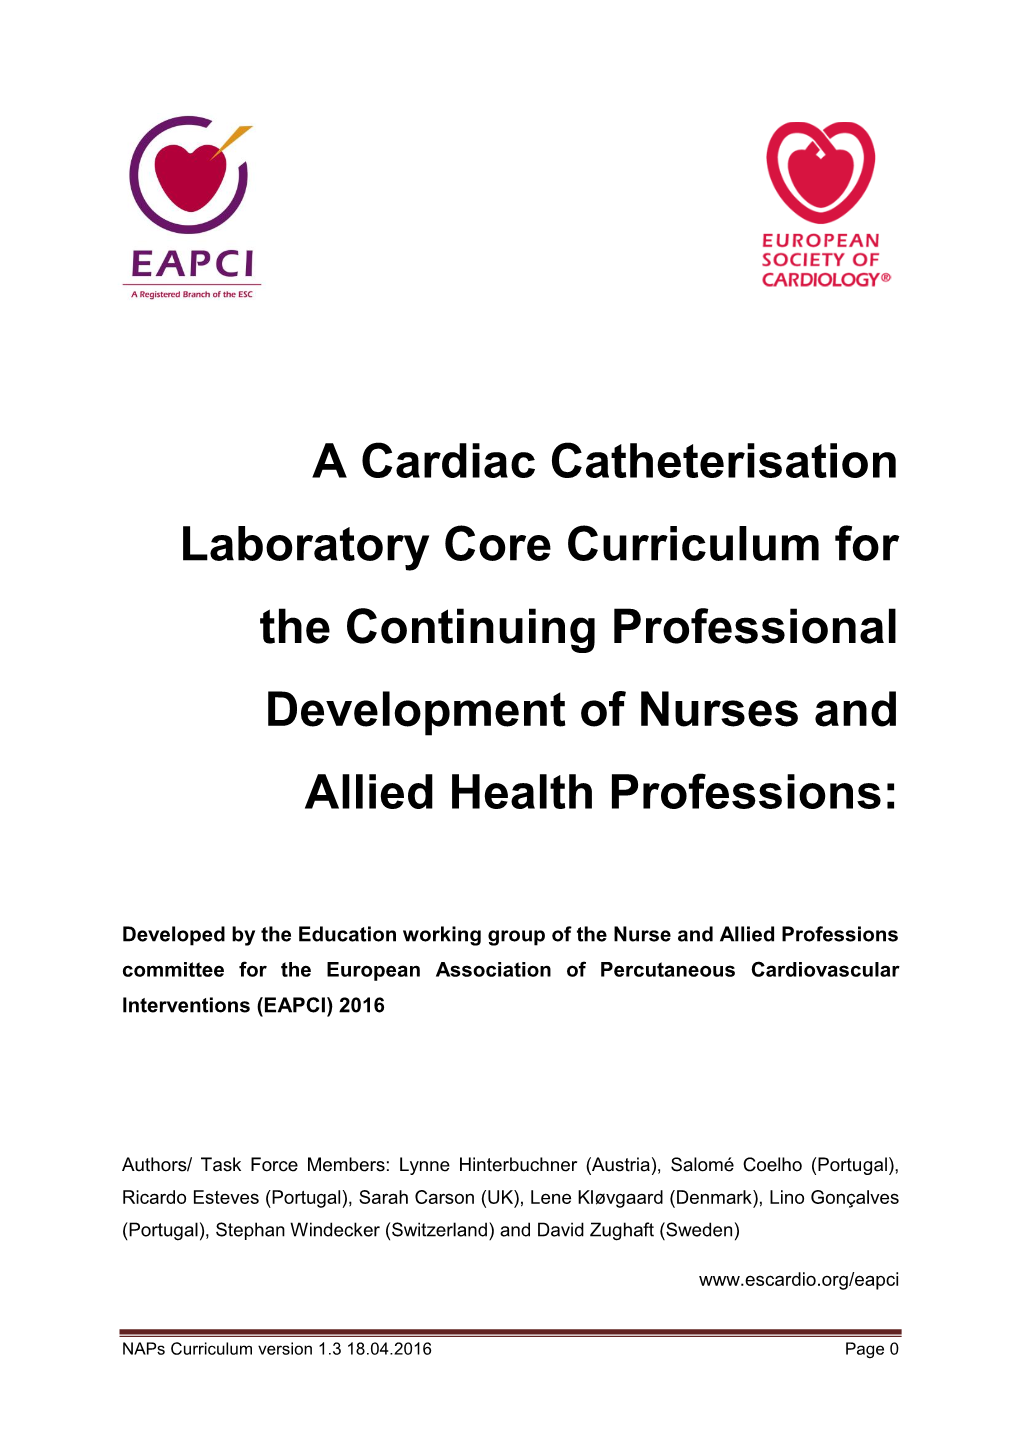 A Cardiac Catheterisation Laboratory Core Curriculum for the Continuing Professional Development of Nurses And